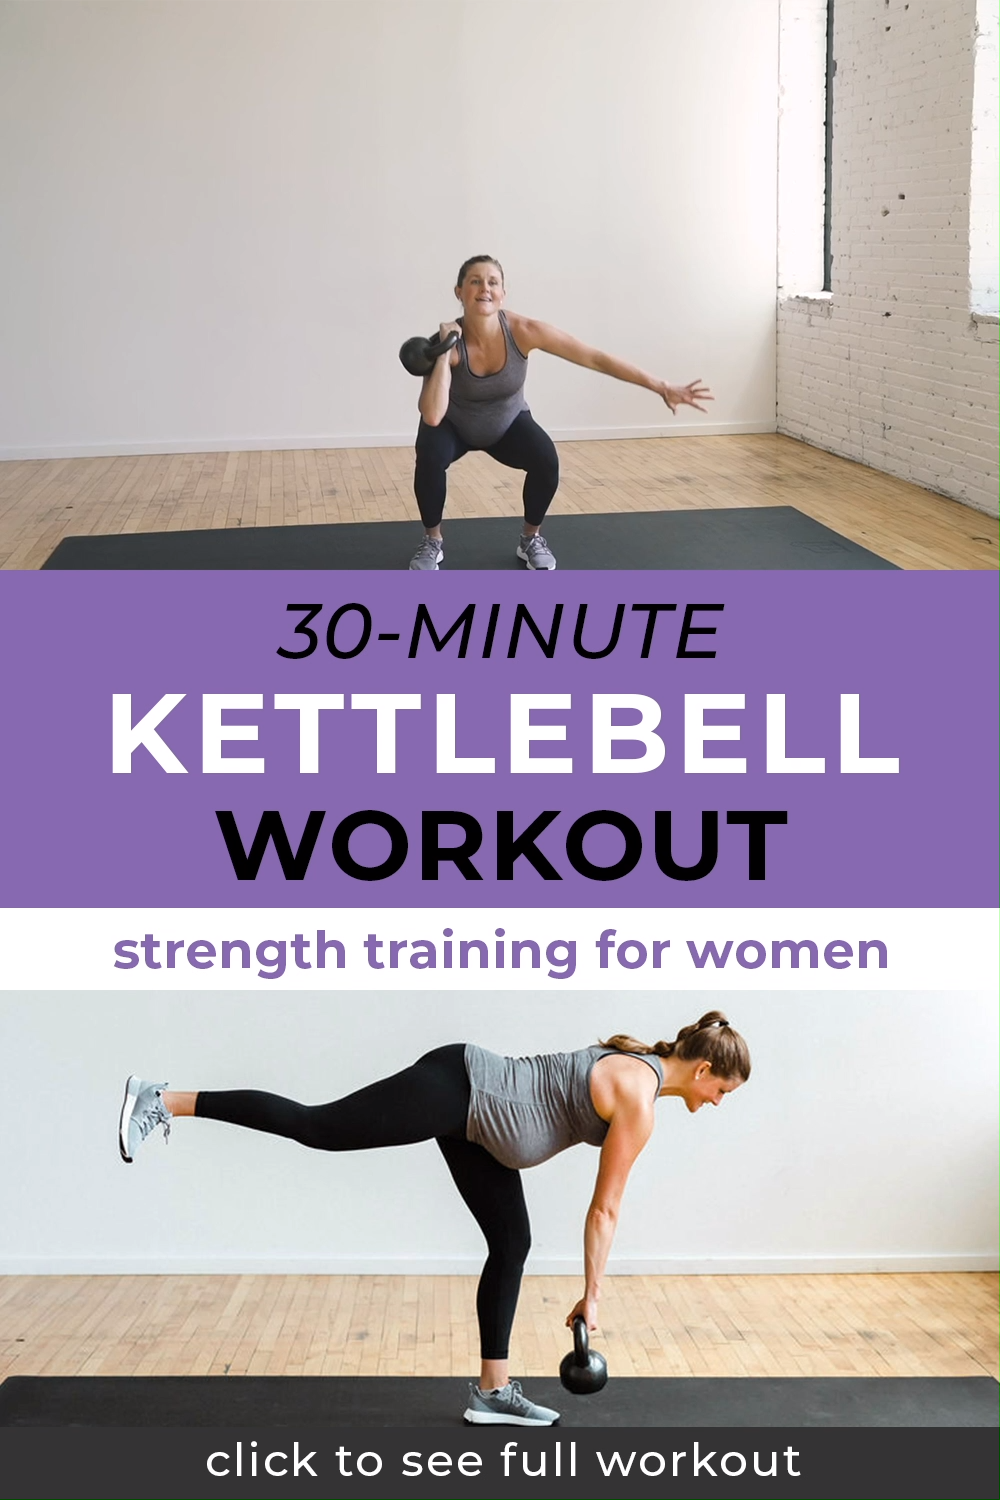 30 Minute Kettlebell Workout Video -   23 fitness At Home videos ideas